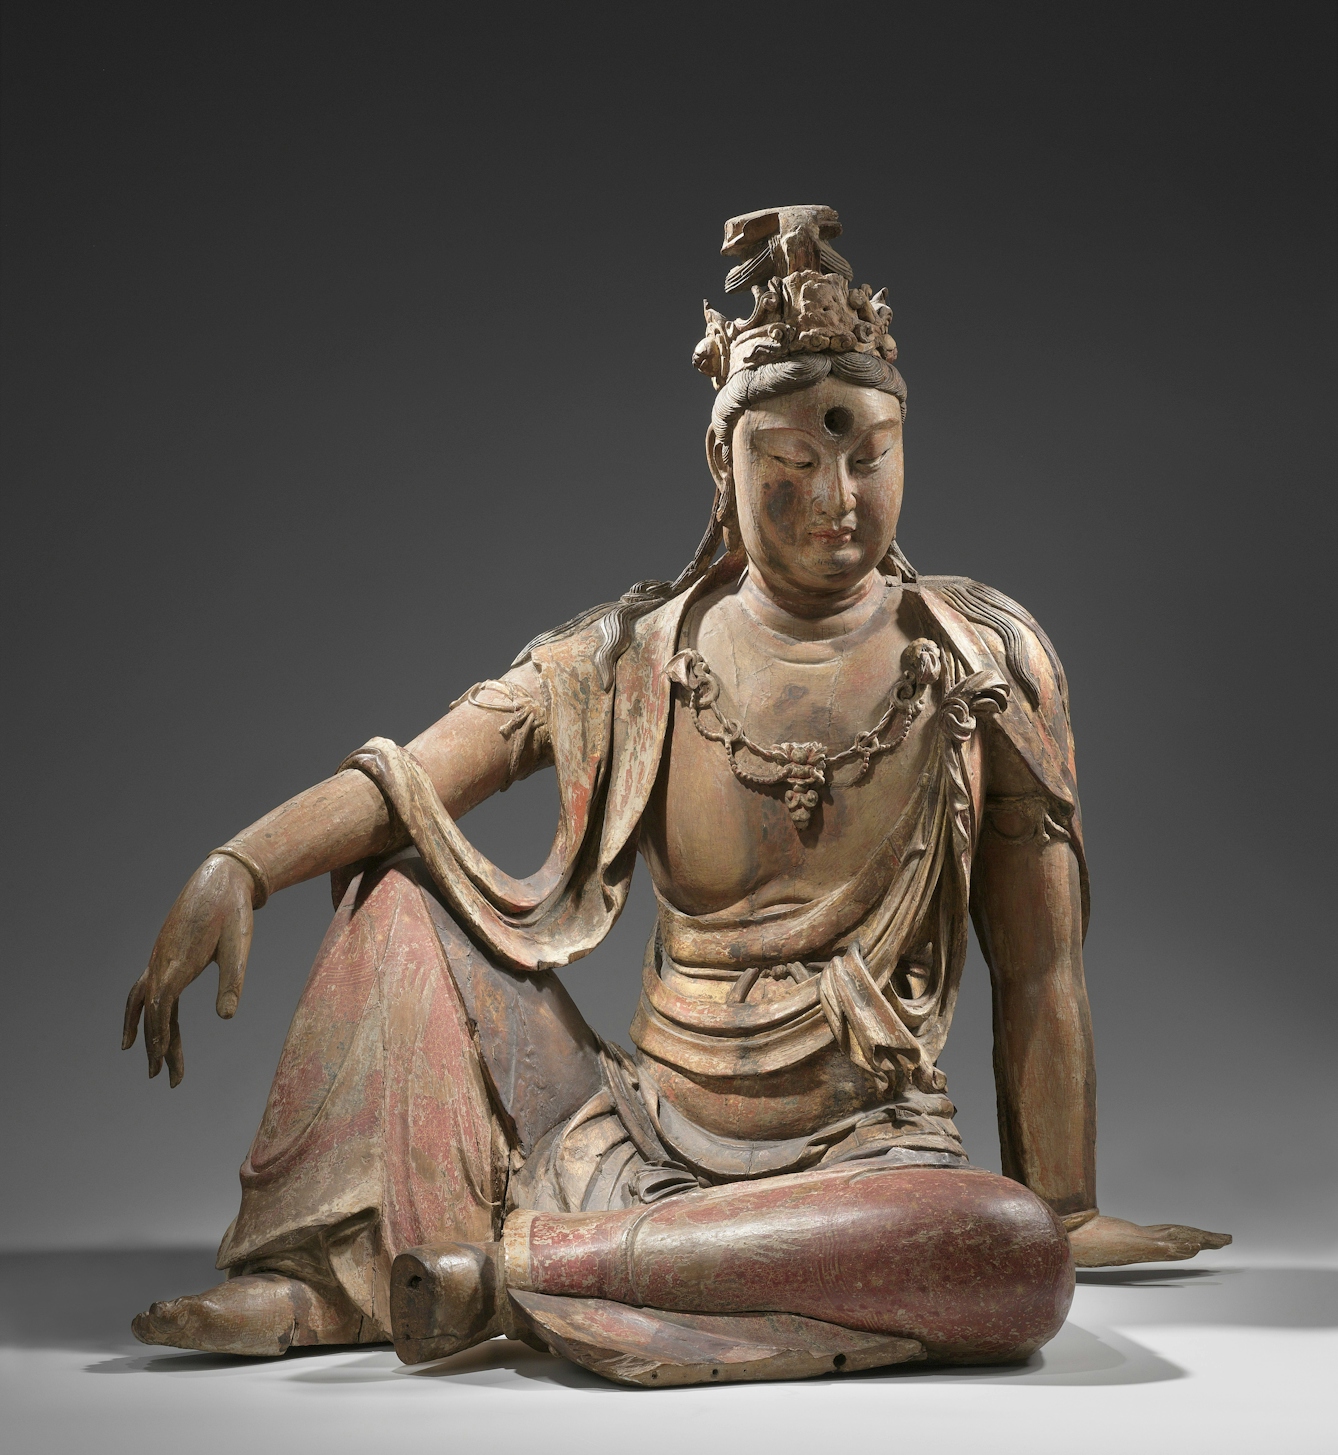 Figurine of seated figure, looking downward in contemplation.